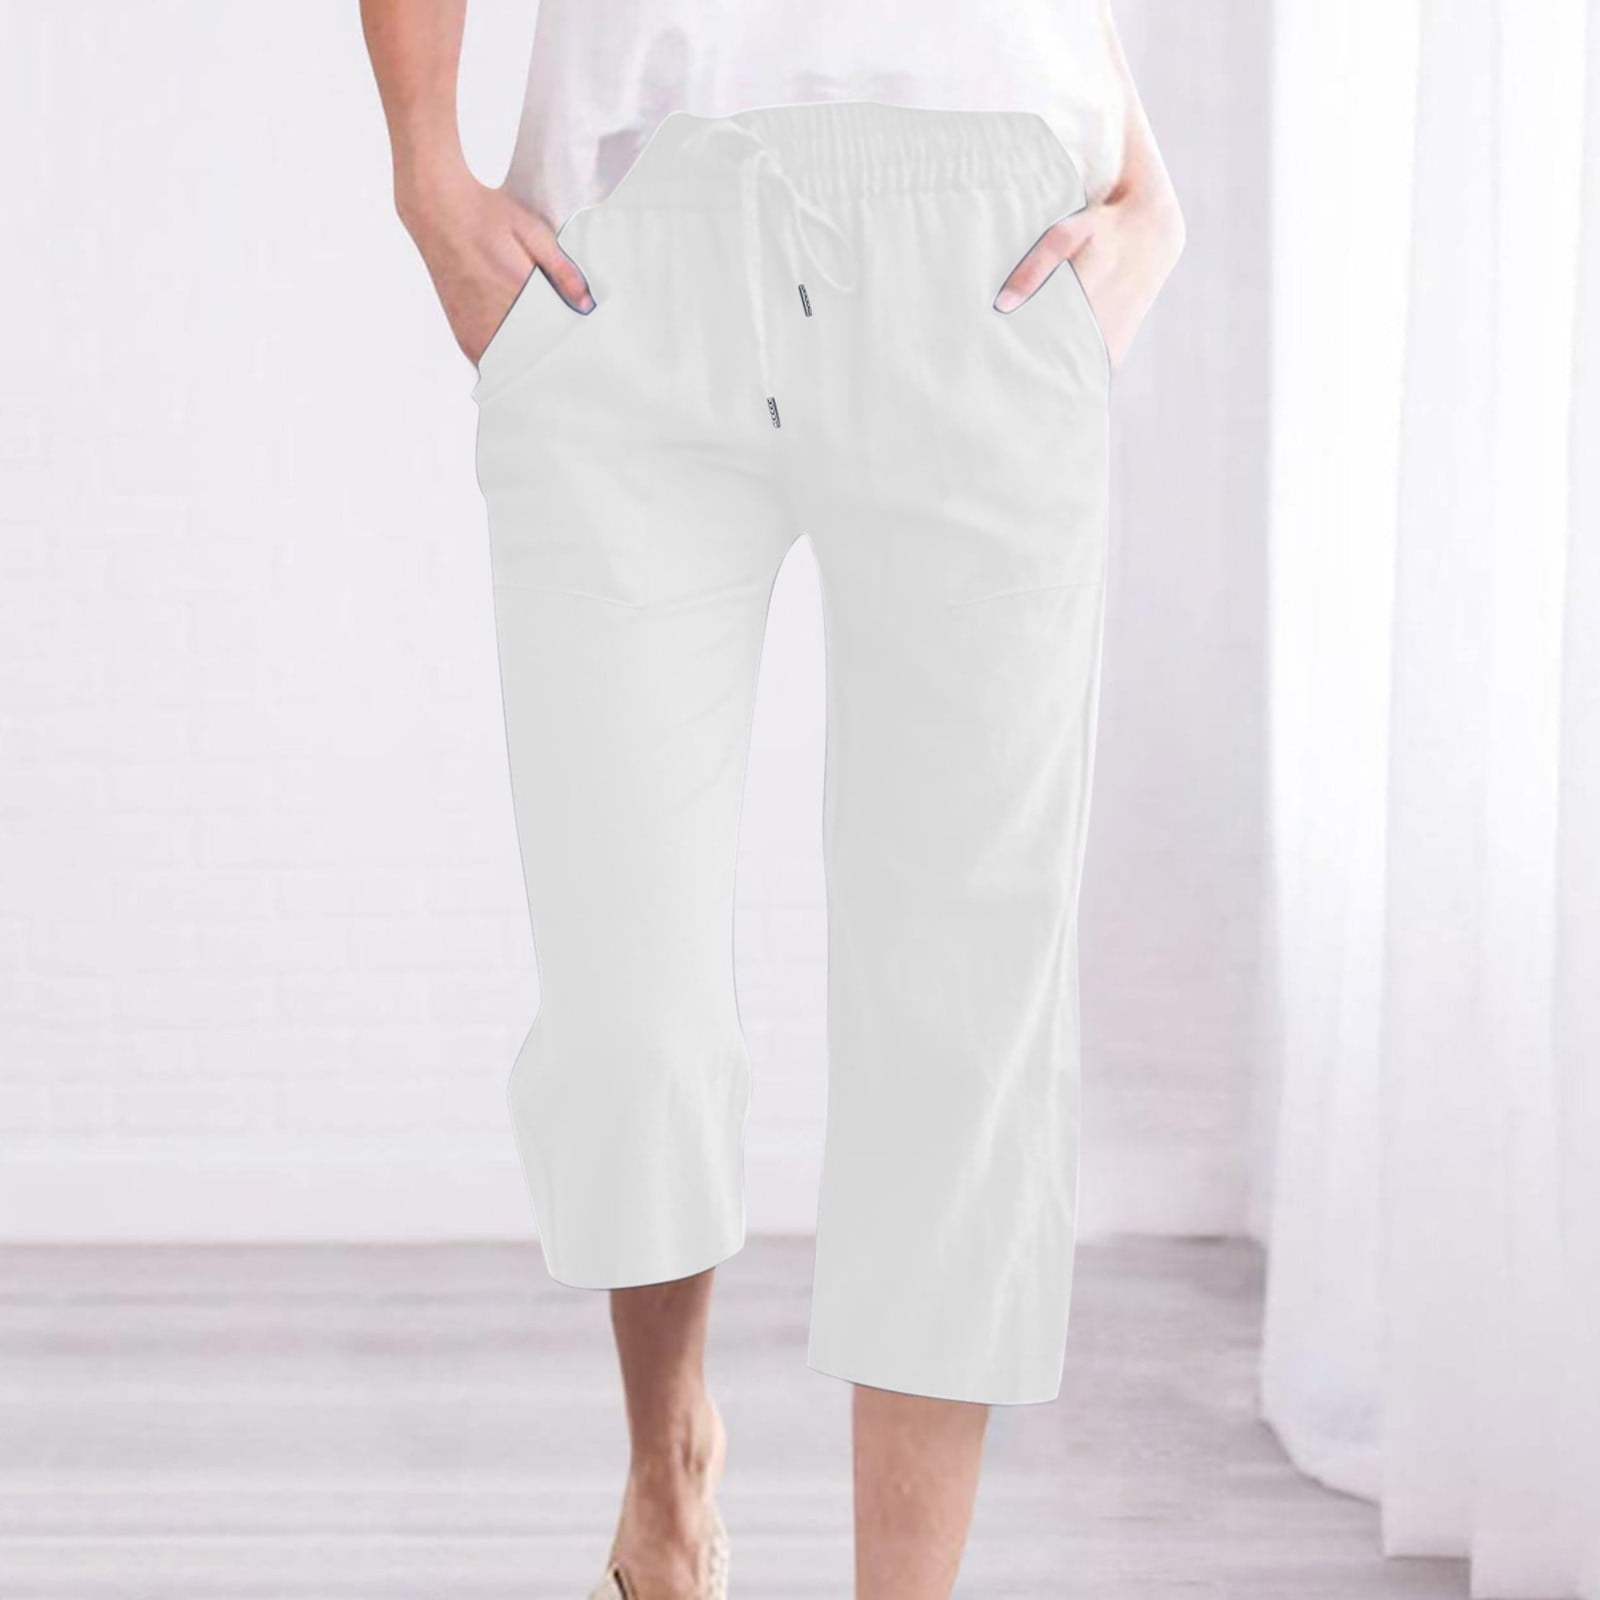 Gufesf Women's Summer Cropped Cotton Linen Capris Pants Casual Loose Fit  Trousers with Pockets Women's Plus Size Capris Q2-white Large